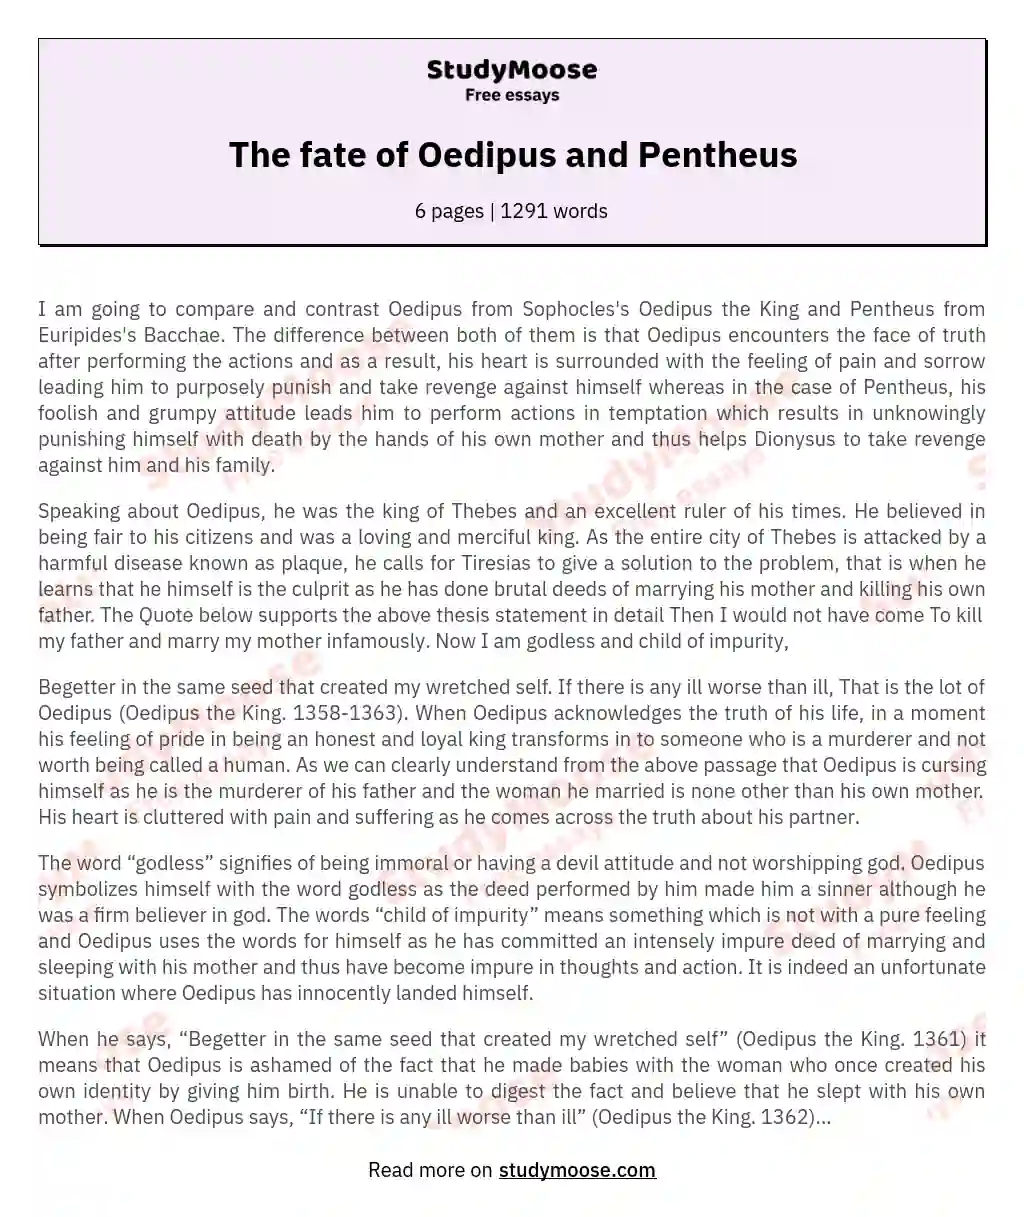 The fate of Oedipus and Pentheus